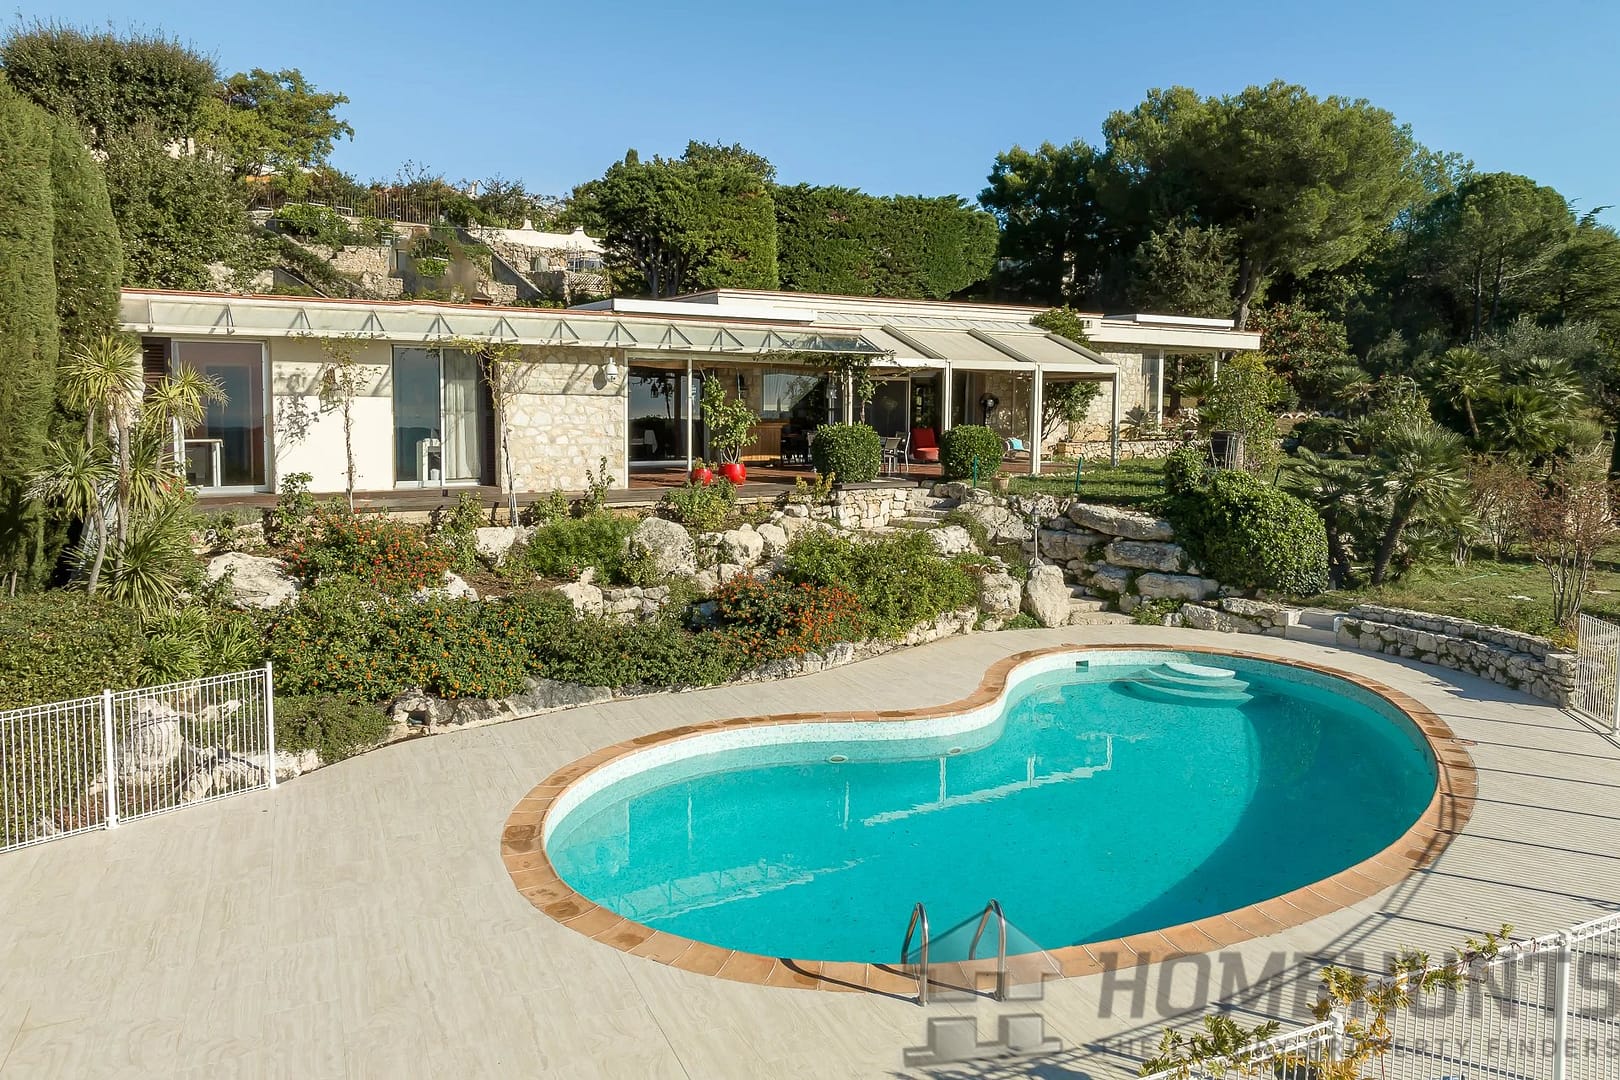 Villa/House For Sale in Chateauneuf Grasse 12